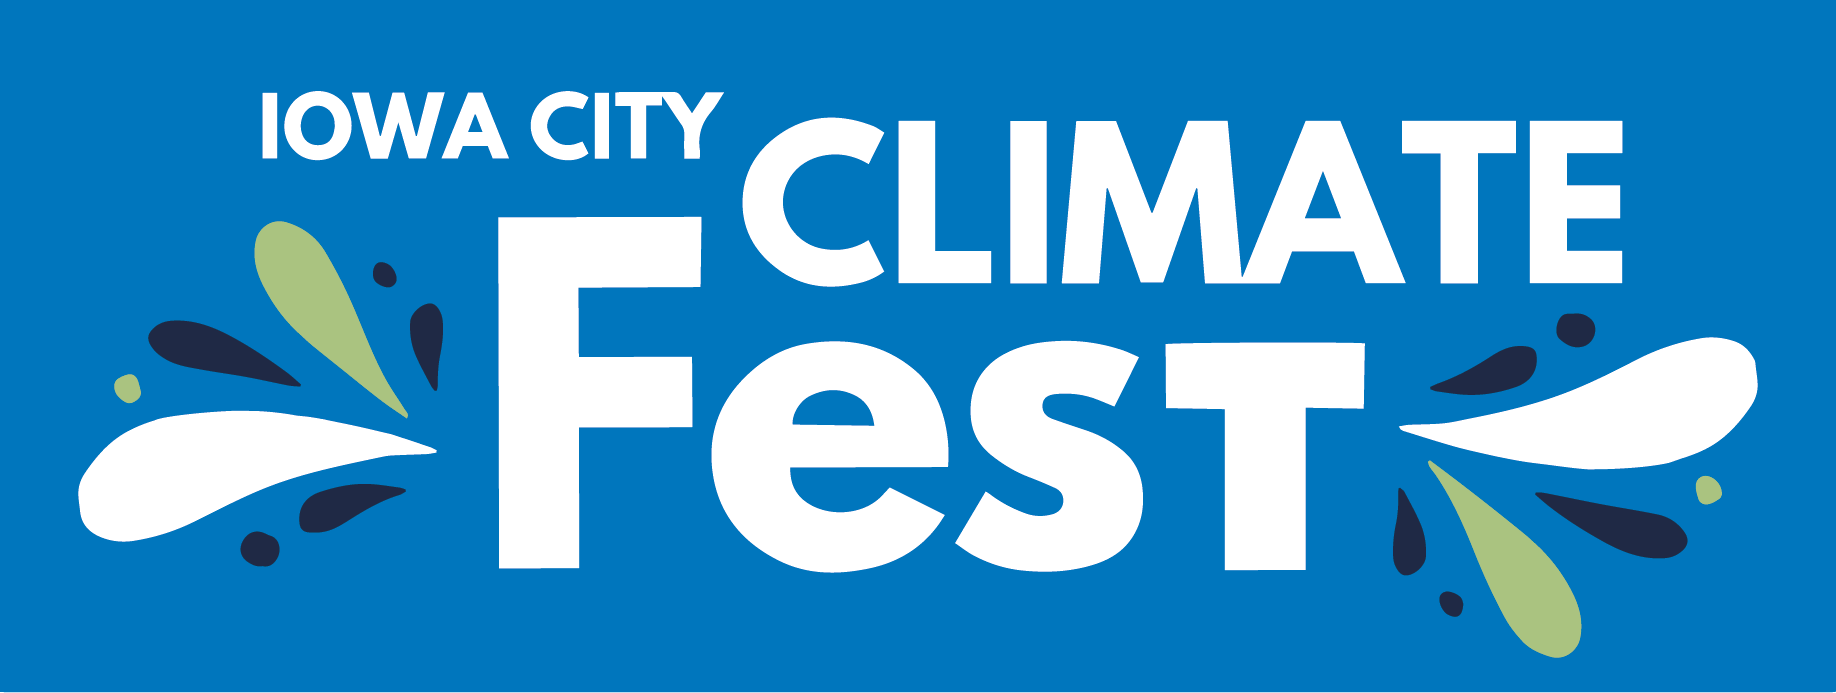 Climate Fest Iowa City logo in blue, green, and white